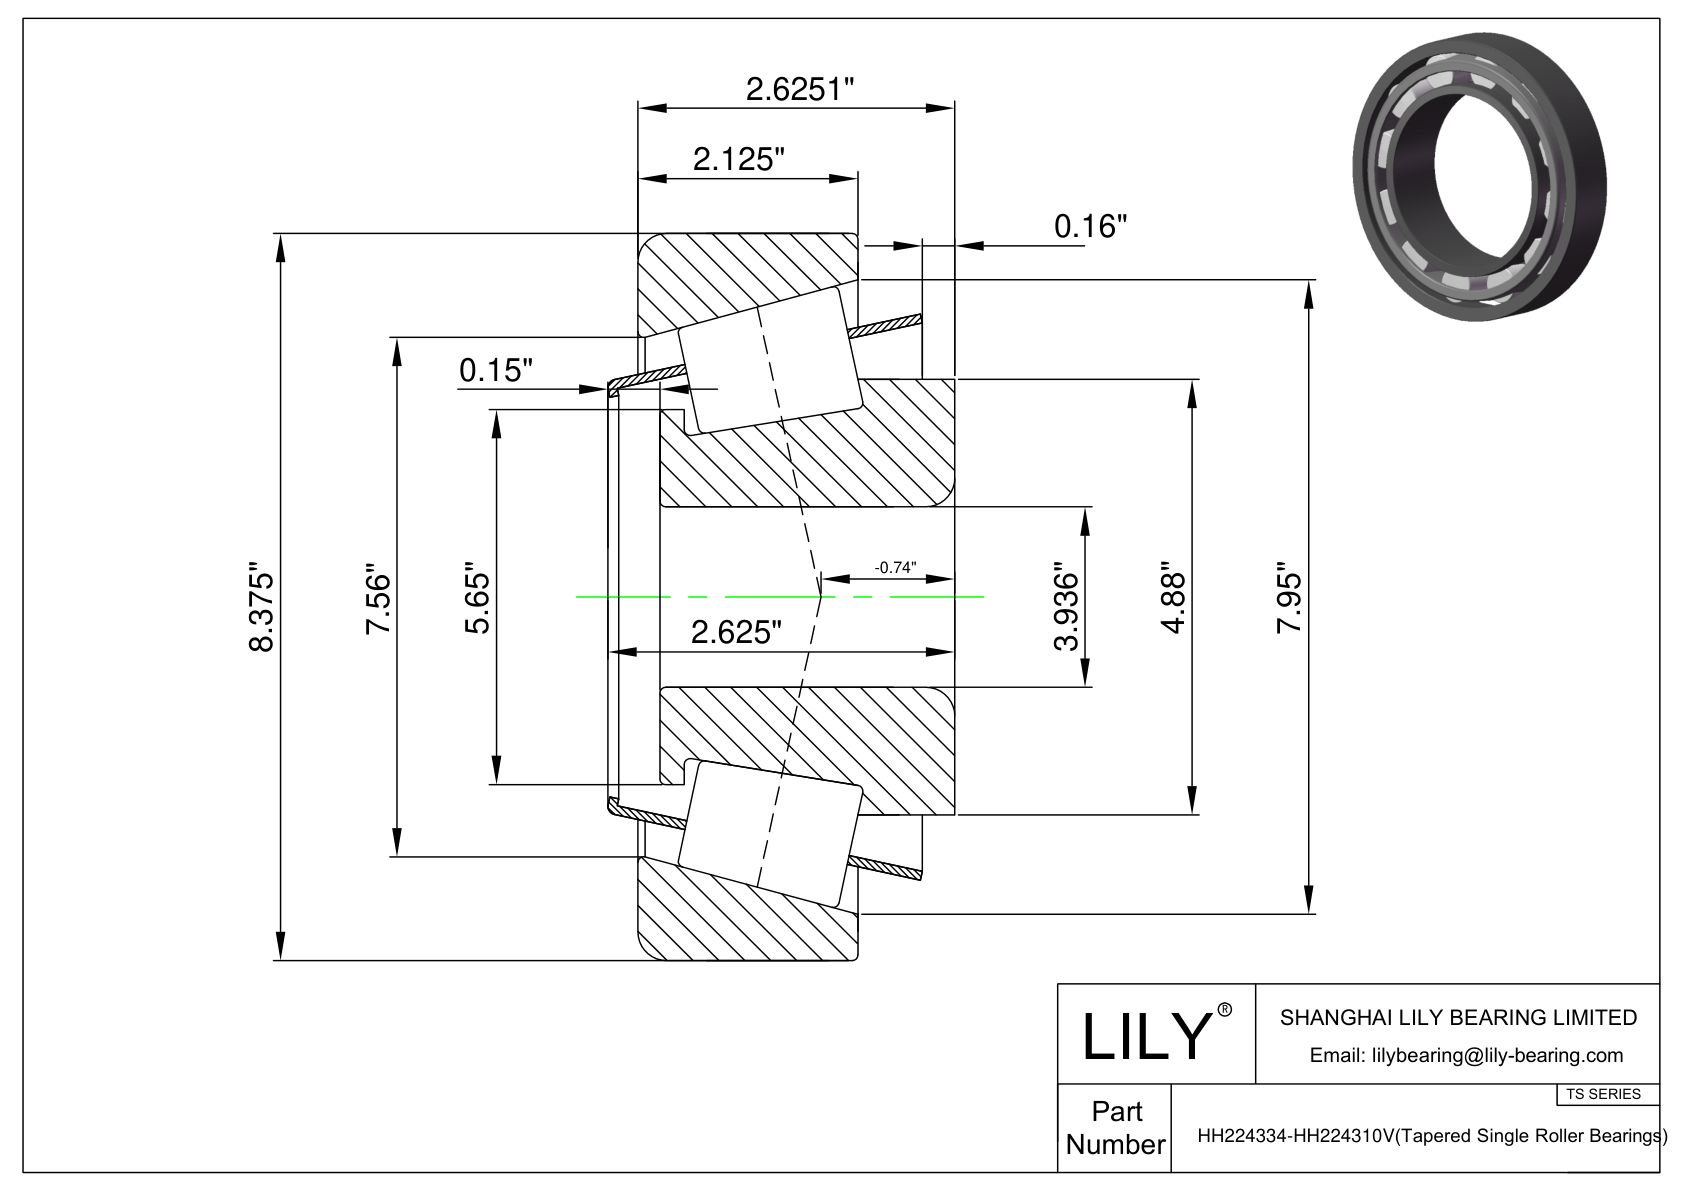 HH224334-HH224310V TS (Tapered Single Roller Bearings) (Imperial) cad drawing